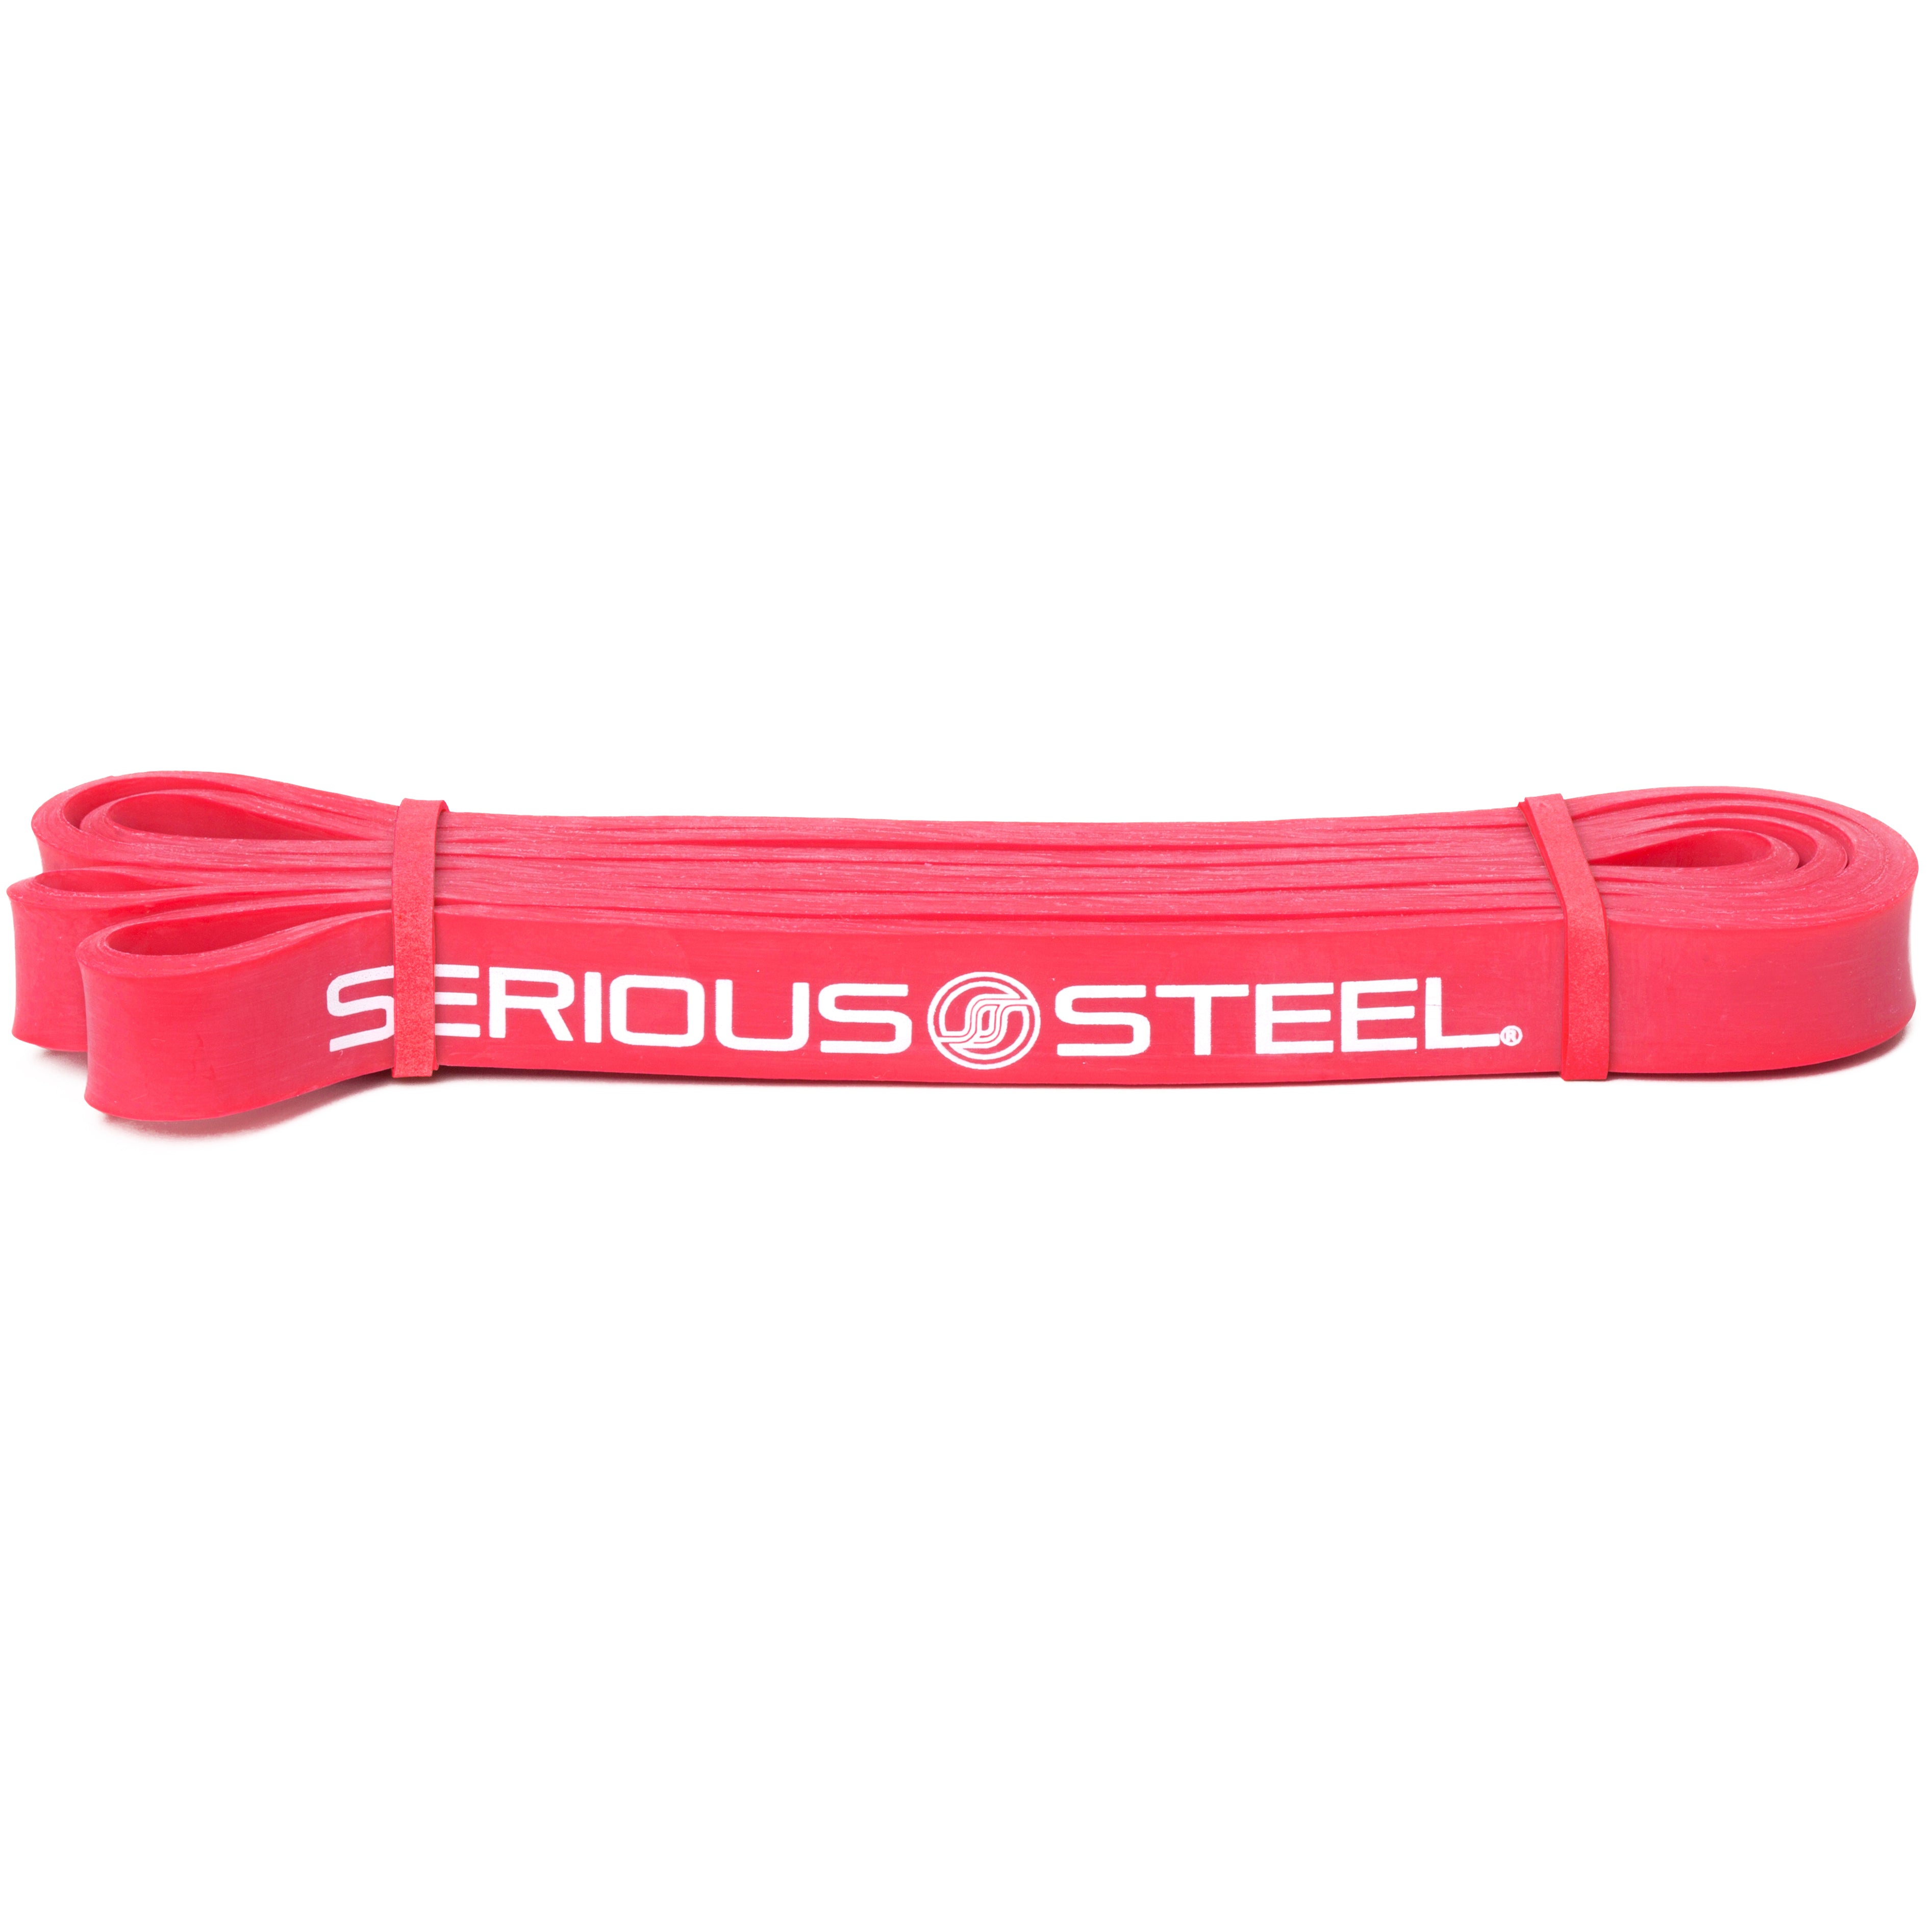 41 Monster Mini Resistance Band – Serious Steel Fitness